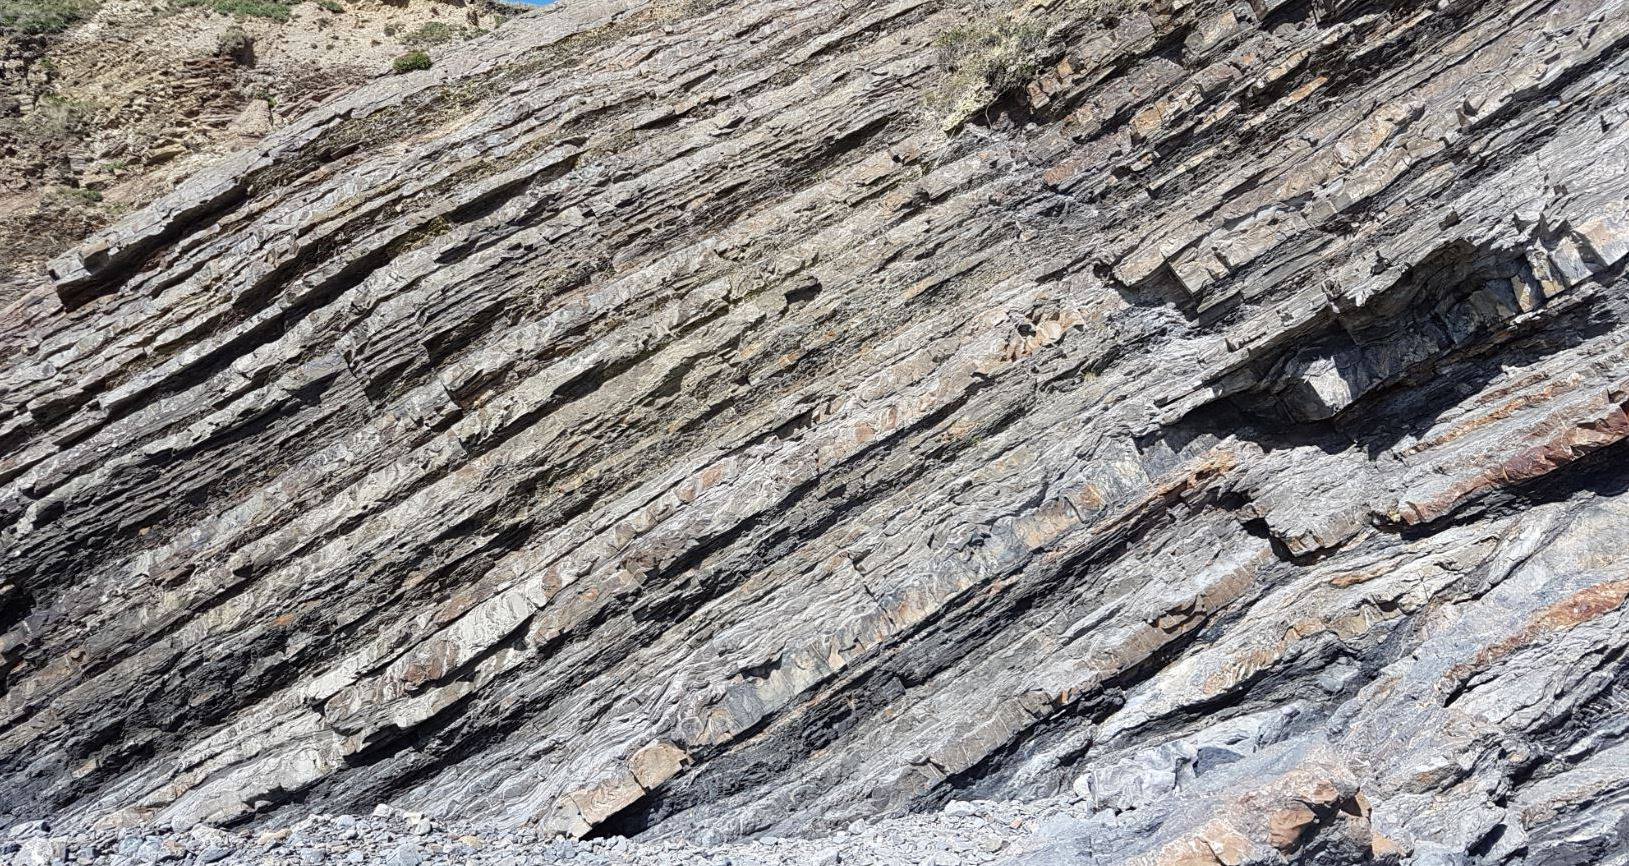 A picture showing the strata in the rocks at Booley Bay